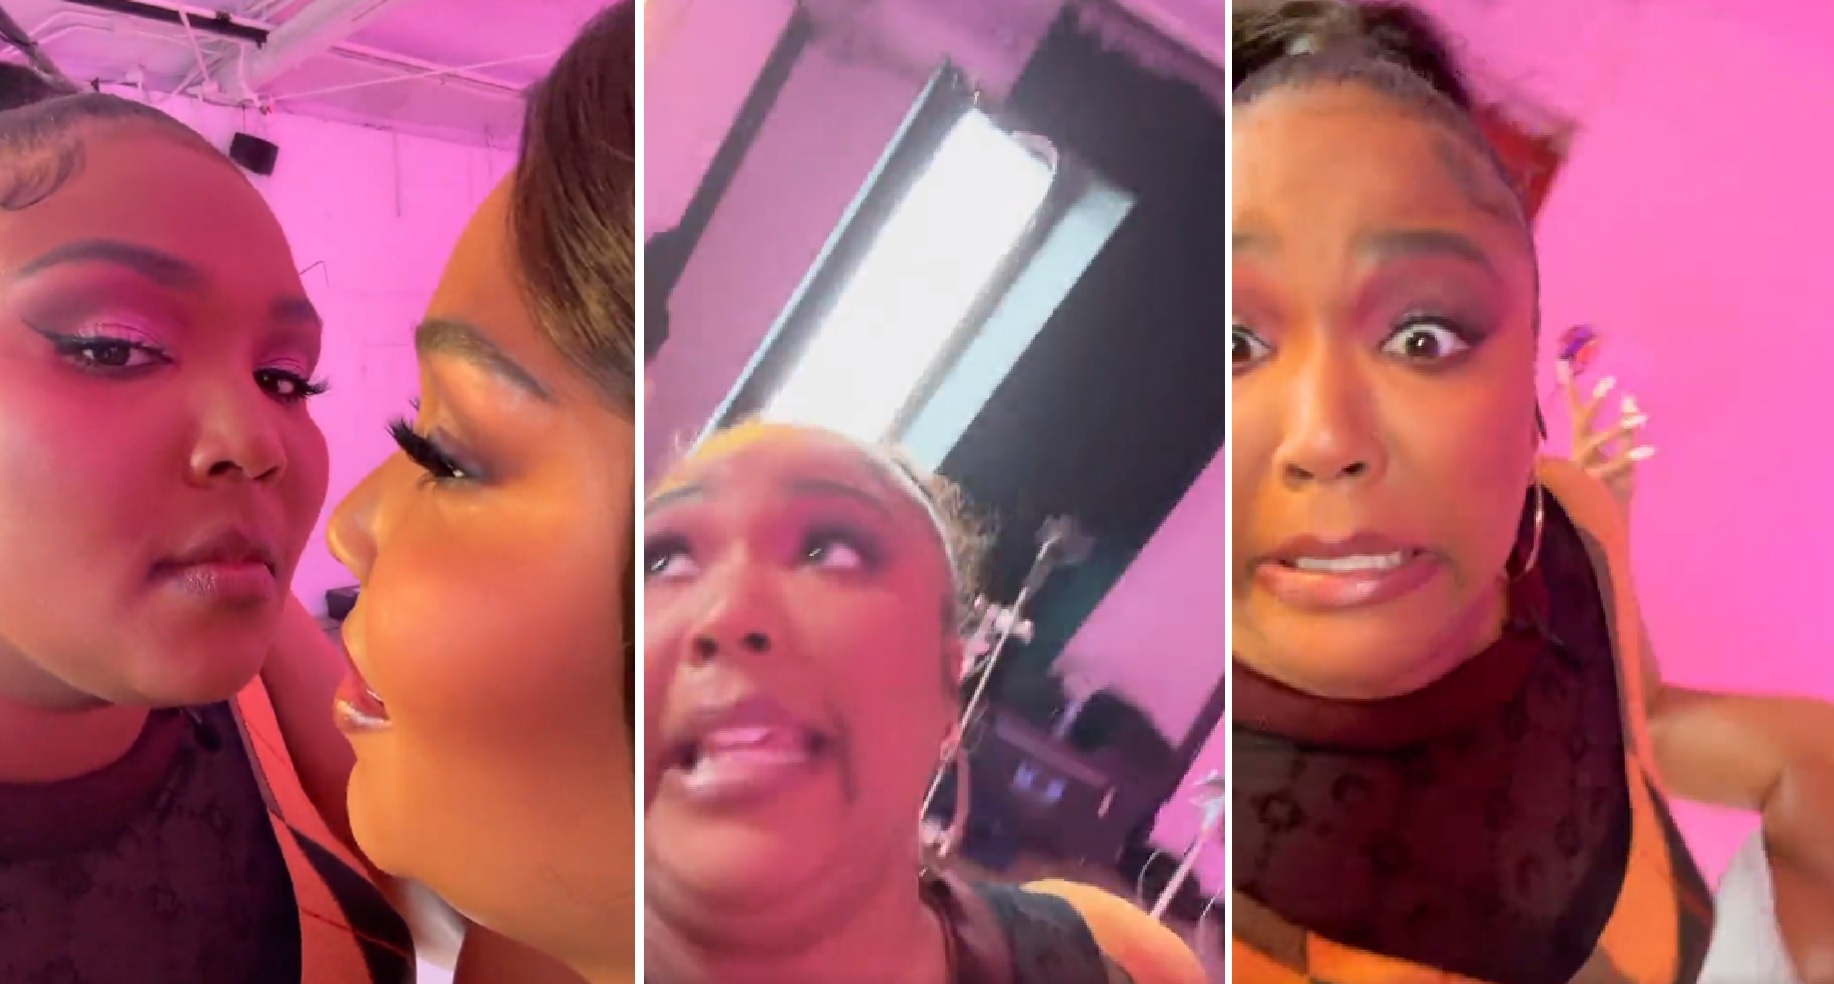 Lizzo Gets Spooked Trying To Kiss Her Madame Tussauds Wax Statue, “Thank you for the twosome”